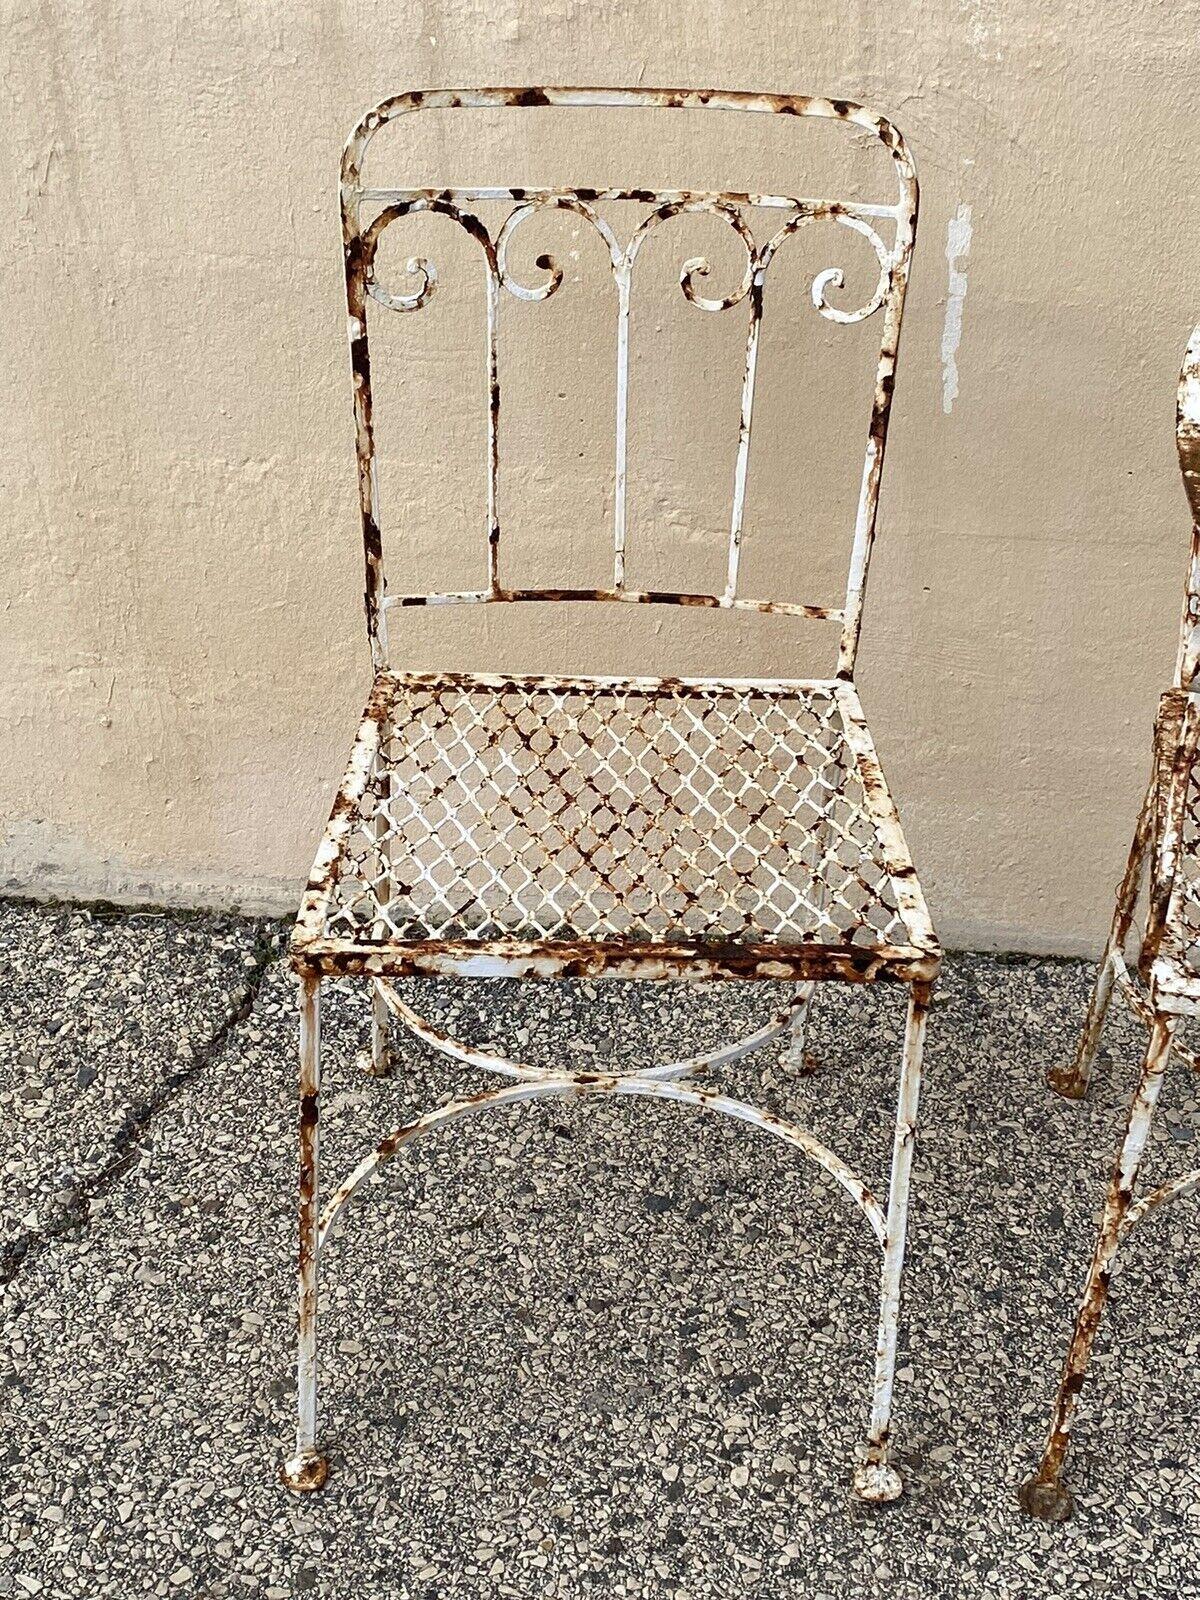 20th Century Antique Art Nouveau Scrolling Wrought Iron Garden Patio Dining Chairs - A Pair For Sale